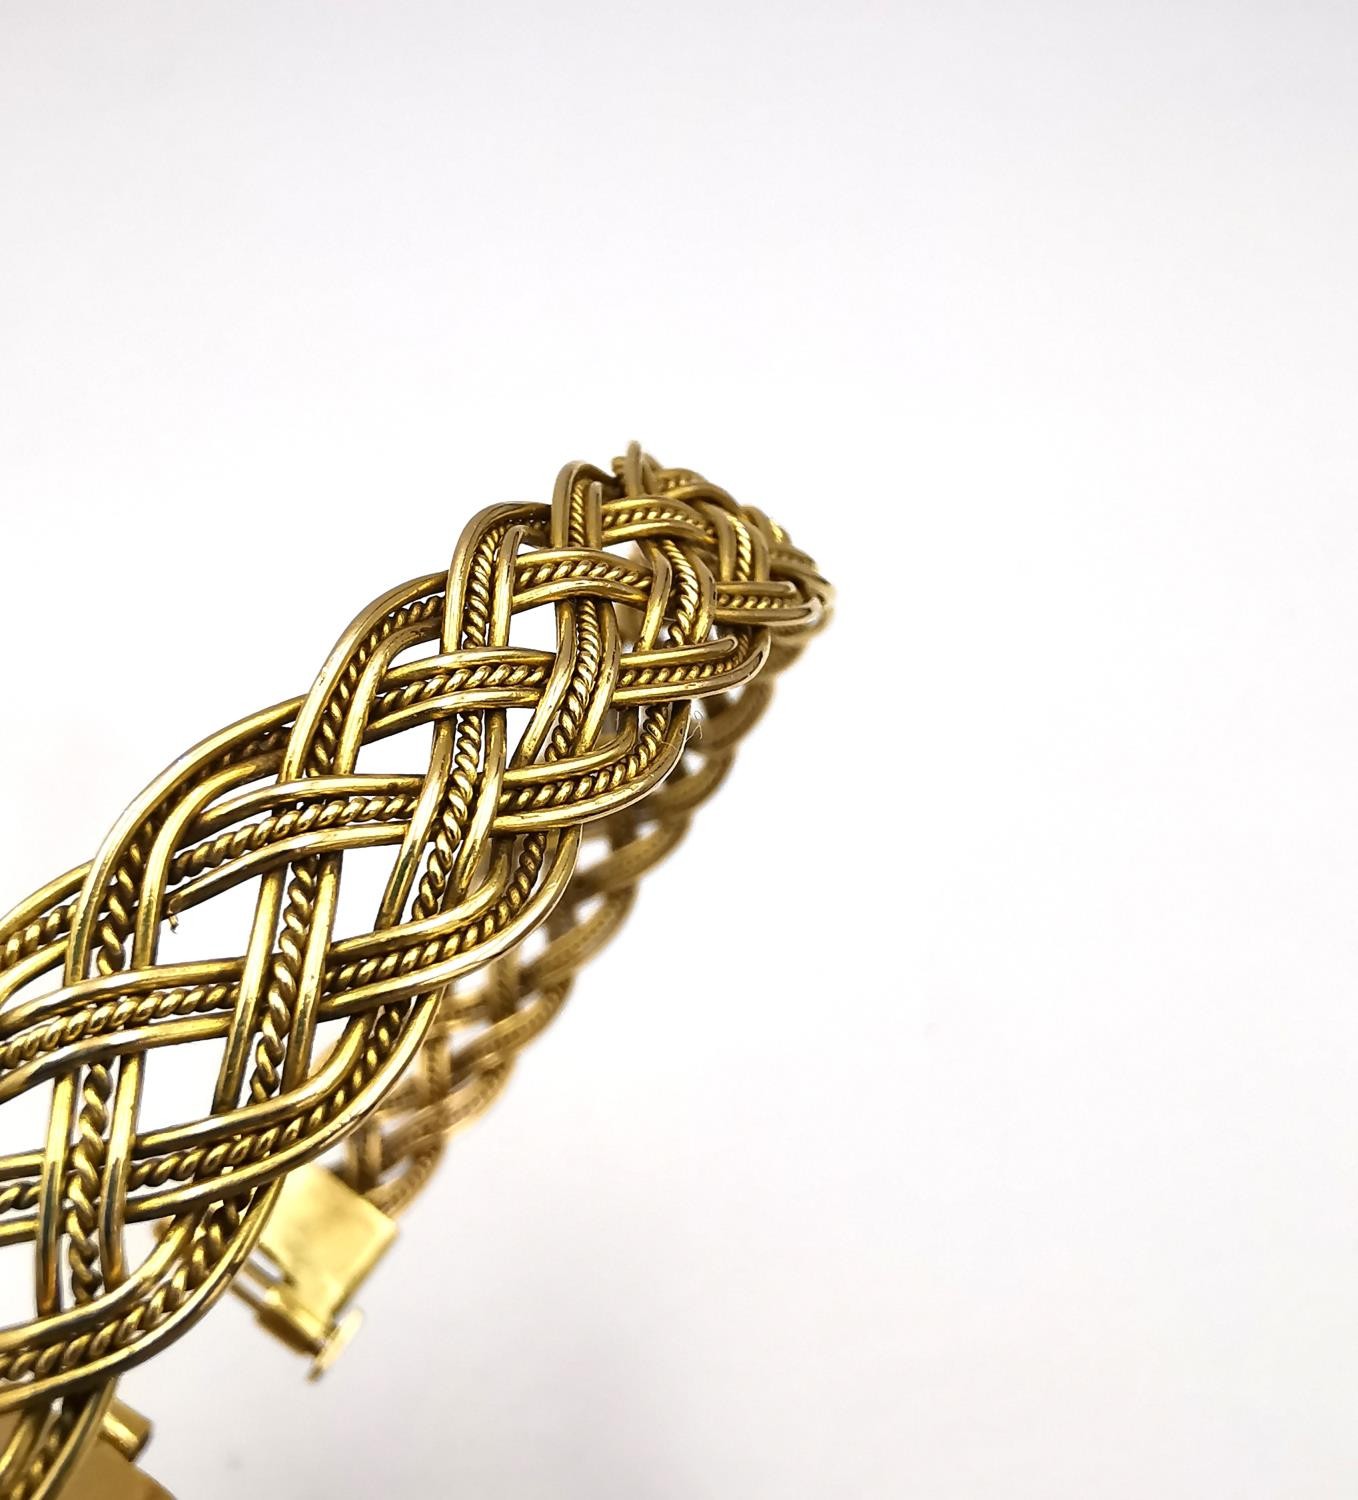 A woven gold plated wirework plaited bracelet with pin fastening. Diameter 6cm. Weight 18.62g. - Image 8 of 10